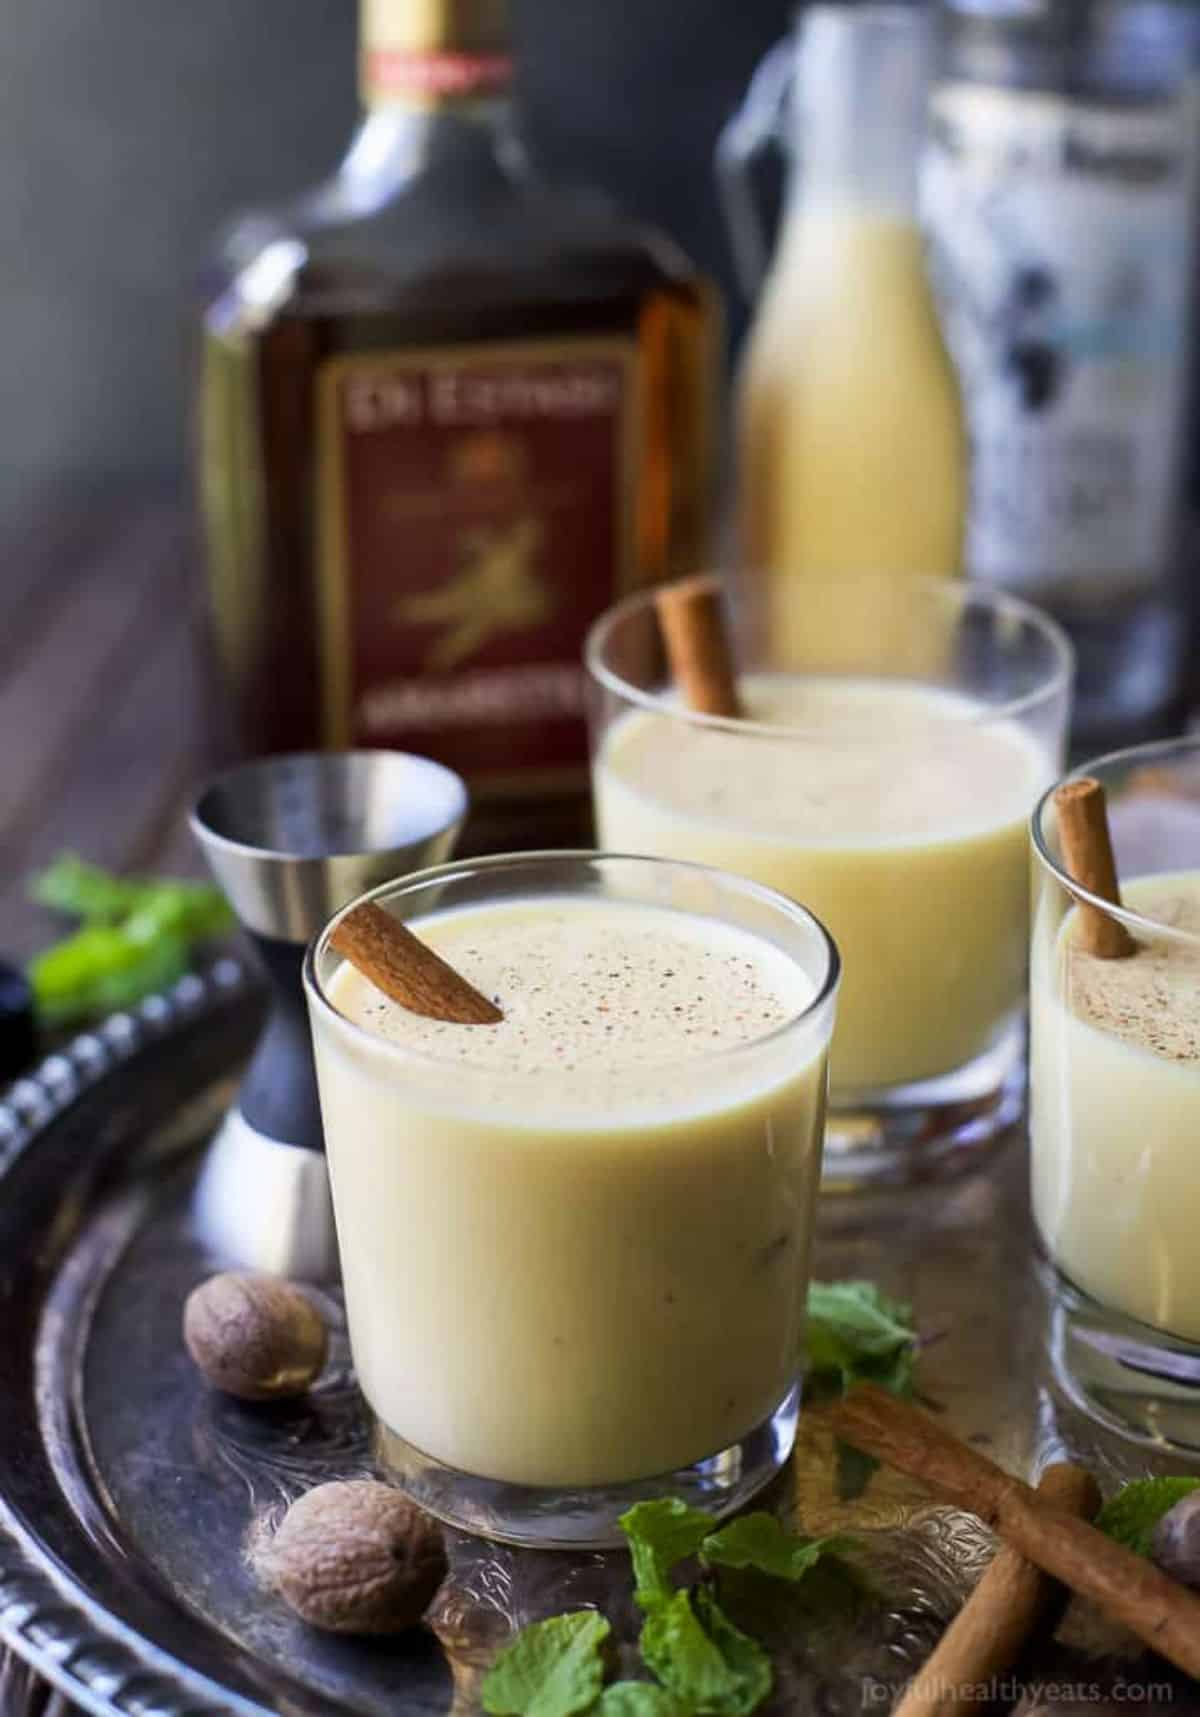 Spiked Eggnog rum cocktails in glass cups with cinnamon sticks on a metal tray.